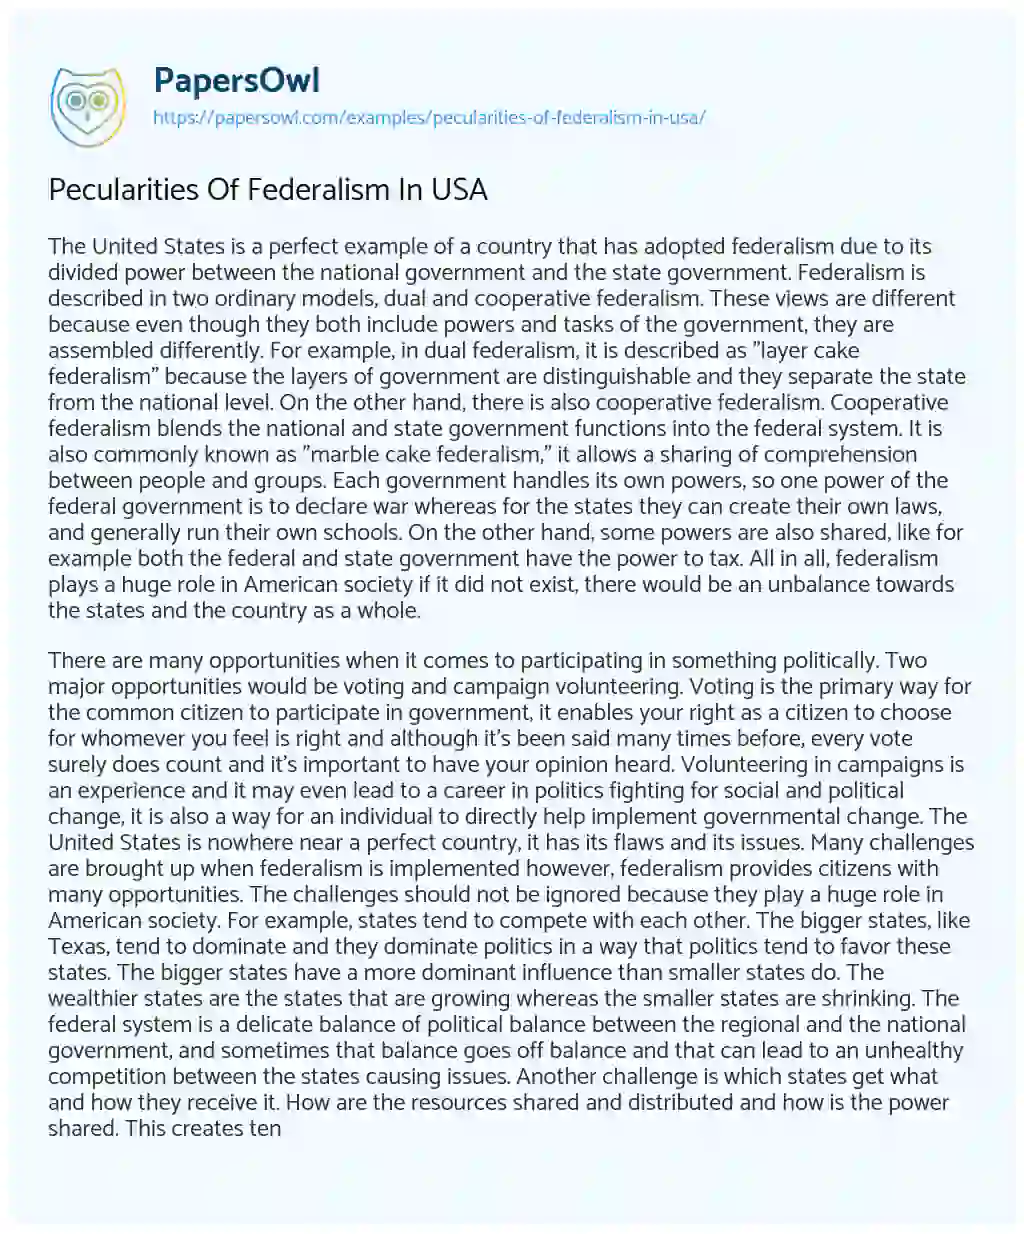 Essay on Pecularities of Federalism in USA